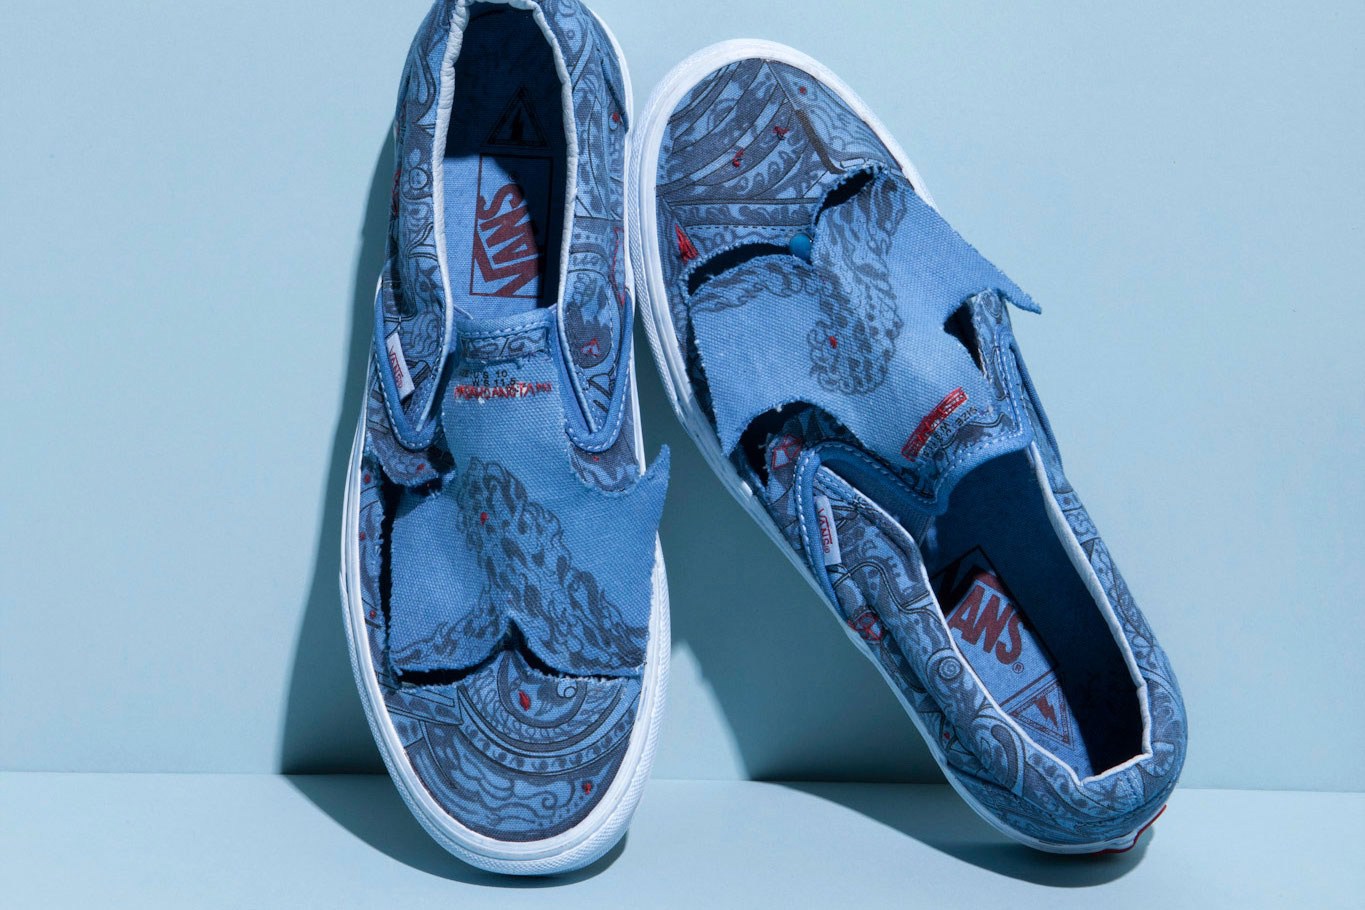 marc jacobs and vans slip on capsule collection - the chicflaneuse.com 9